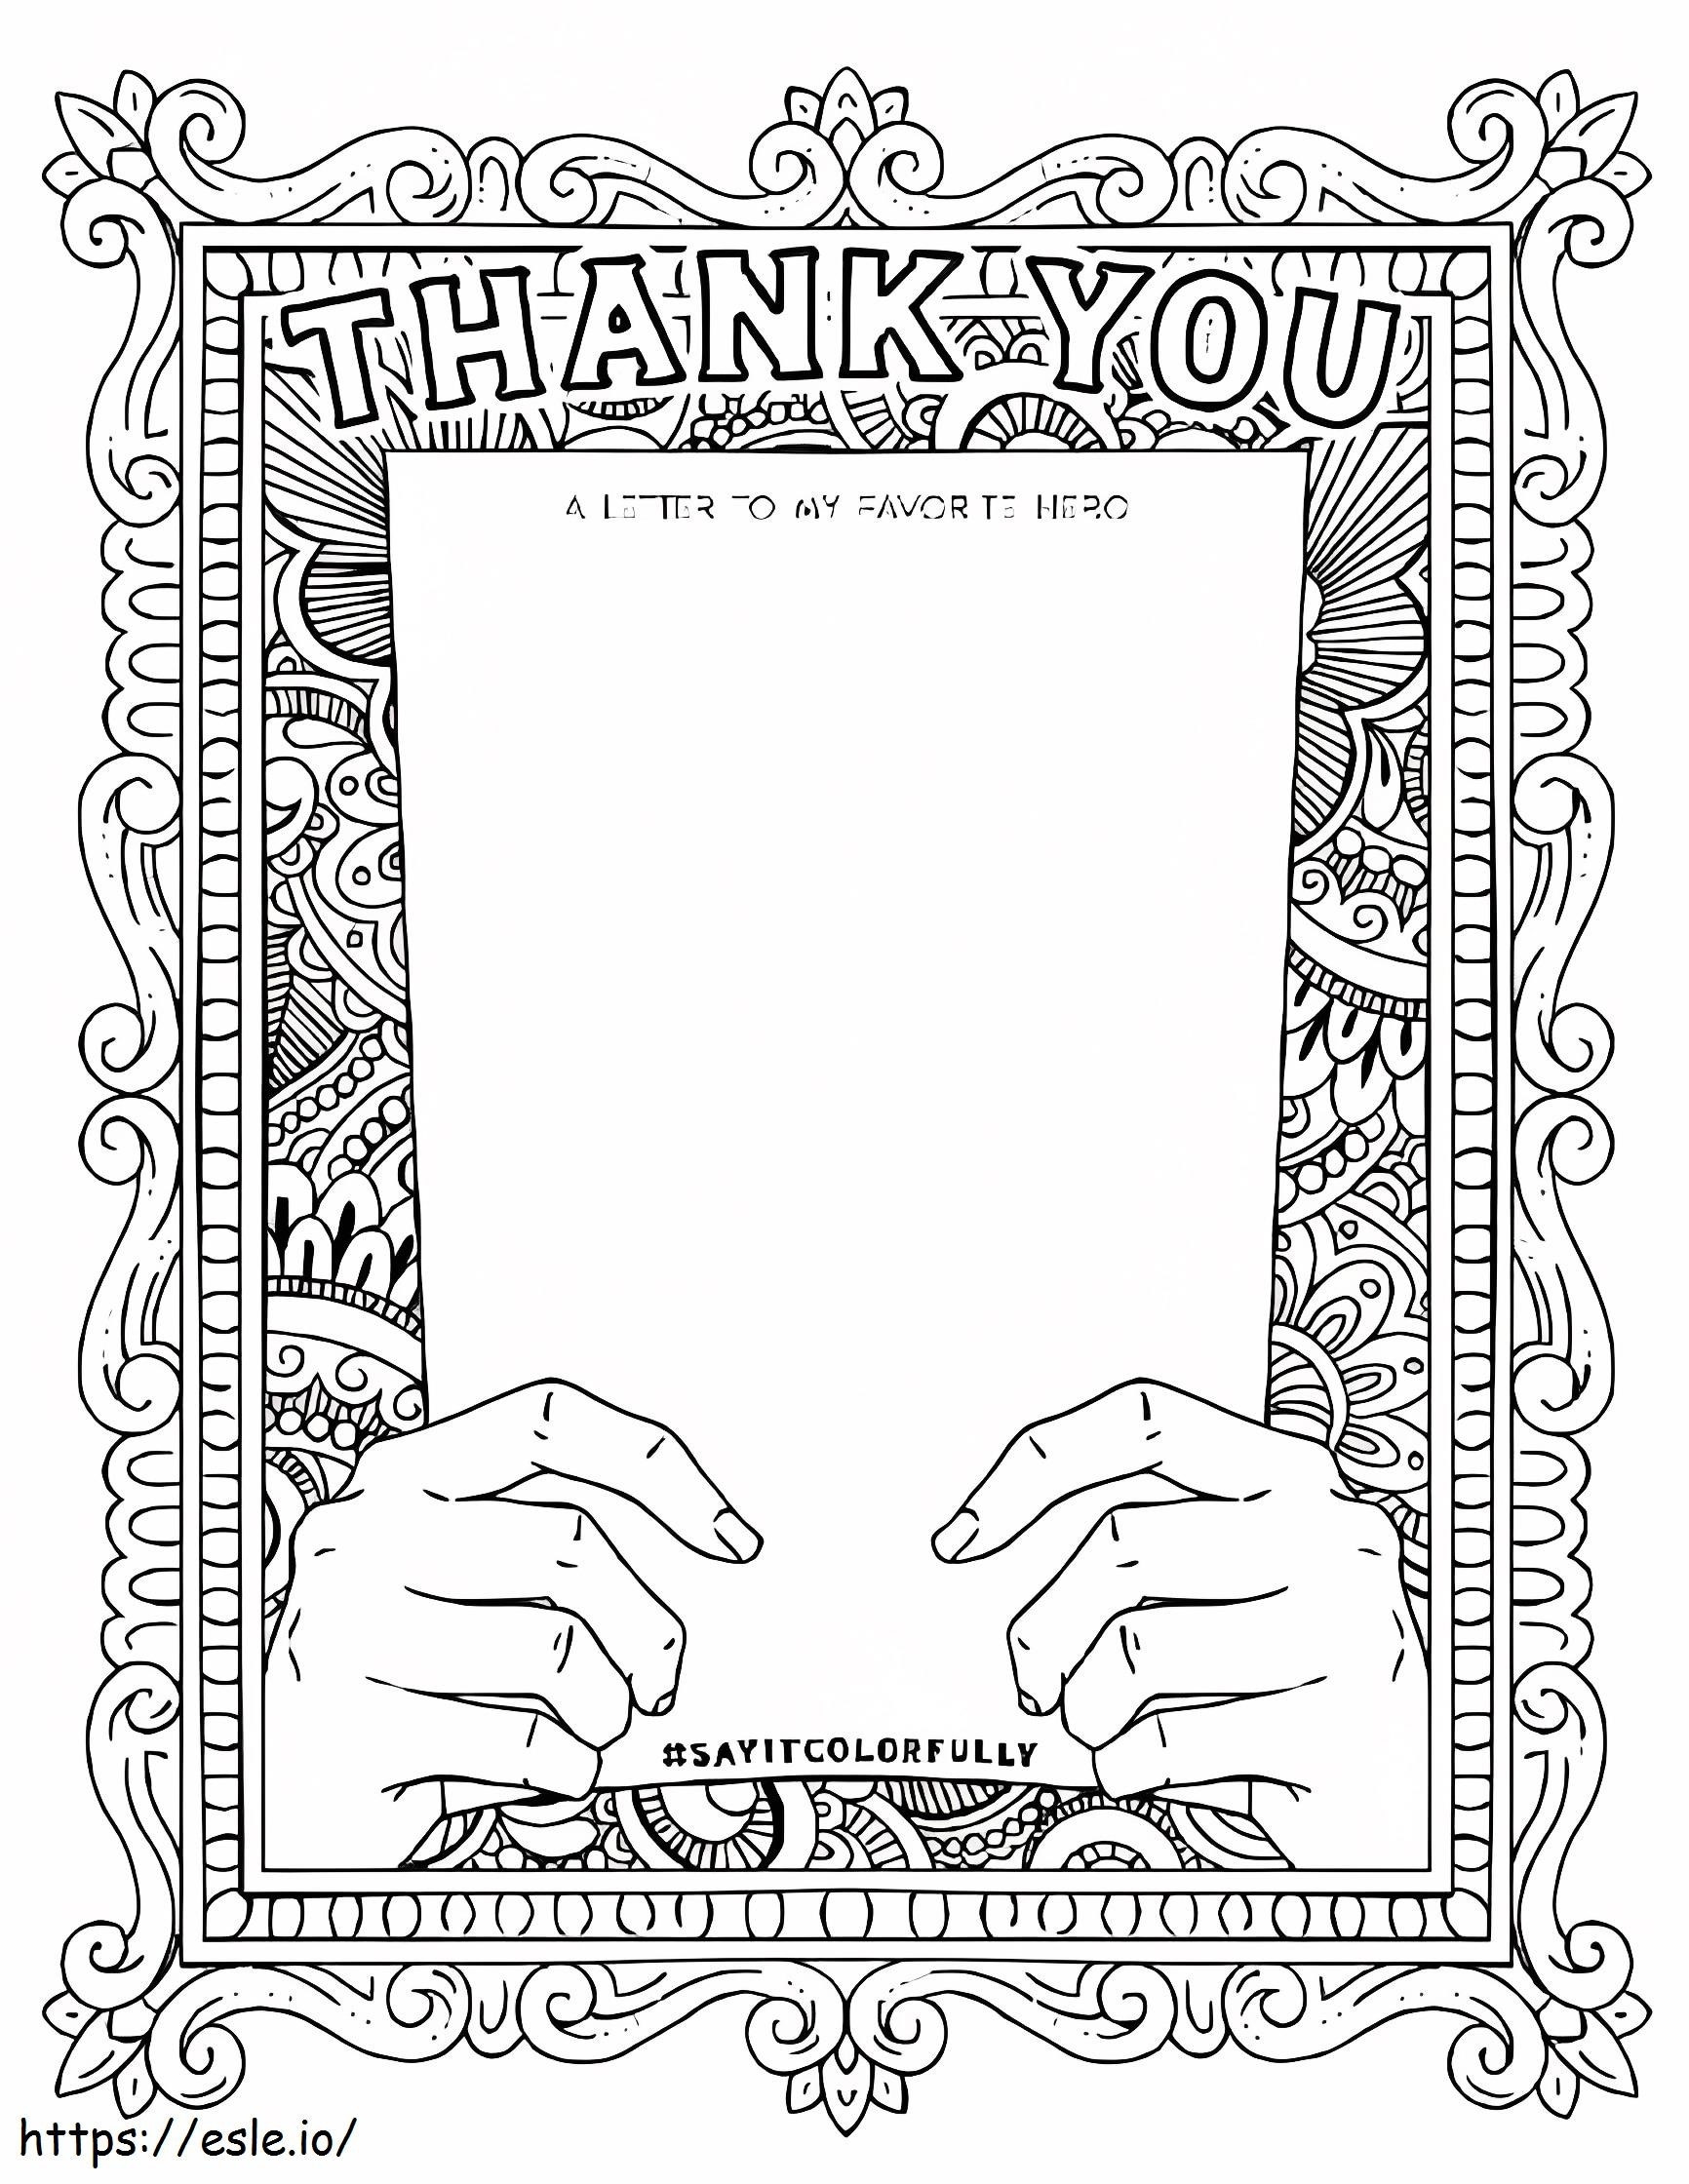 Say It Colorfully Hero Thank You Letter coloring page